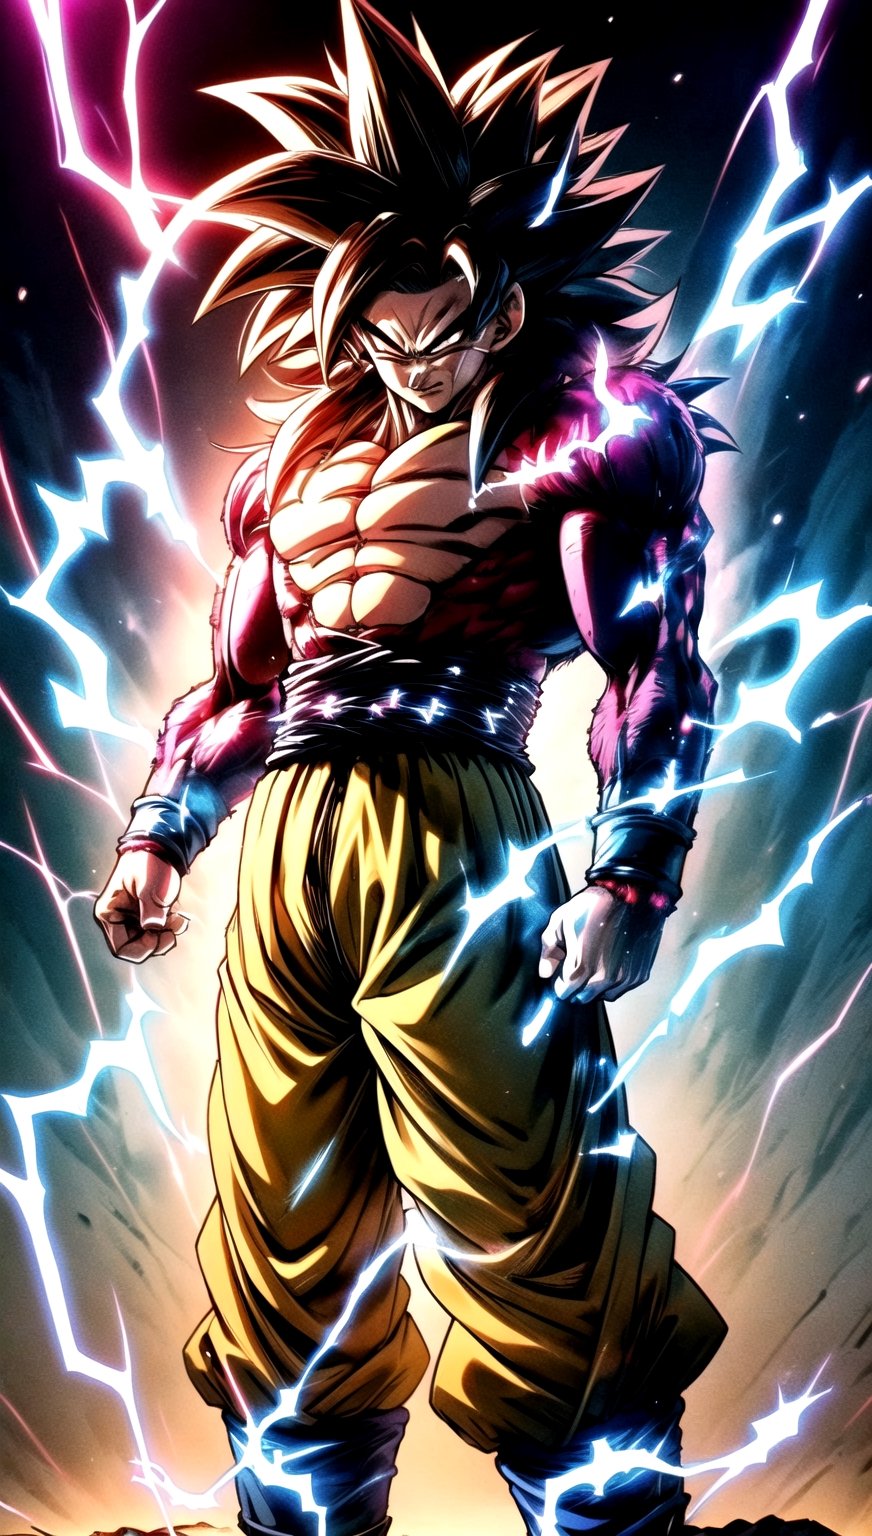 We can visualize the iconic character from the animated series Dragon Ball Z, Goku, in his super saiyan phase 4 full power transformation. Yellow_amber eyes. Flashes of red light and electricity surround his entire body, a reddish glow. smiling, cocky. His ki is immense and mystical, amber yellow in color. His look is wild. It is at the culmination of a great battle for the fate of planet Earth. He is prepared to attack with one of his classic poses. The image quality and details have to be worthy of one of the most famous characters in all of anime history and honor him as he deserves. reflecting the design style and details of the great Akira Toriyama. (electricity:1.9), (reddish backing:1.5), standing, full body.

 



PNG image format, sharp lines and borders, solid blocks of colors, over 300ppp dots per inch, 32k ultra high definition, 530MP, Fujifilm XT3, cinematographic, (anime:1.6), 4D, High definition RAW color professional photos, photo, masterpiece, realistic, ProRAW, realism, photorealism, high contrast, digital art trending on Artstation ultra high definition detailed realistic, detailed, skin texture, hyper detailed, realistic skin texture, facial features, armature, best quality, ultra high res, high resolution, detailed, raw photo, sharp re, lens rich colors hyper realistic lifelike texture dramatic lighting unrealengine trending, ultra sharp, pictorial technique, (sharpness, definition and photographic precision), (contrast, depth and harmonious light details), (features, proportions, colors and textures at their highest degree of realism), (blur background, clean and uncluttered visual aesthetics, sense of depth and dimension, professional and polished look of the image), work of beauty and complexity. perfectly symmetrical body.
(aesthetic + beautiful + harmonic:1.5), (ultra detailed face, ultra detailed eyes, ultra detailed mouth, ultra detailed body, ultra detailed perfect hands, ultra detailed clothes, ultra detailed background, ultra detailed scenery:1.5),



detail_master_XL:0.9,SDXLanime:0.8,LineAniRedmondV2-Lineart-LineAniAF:0.8,EpicAnimeDreamscapeXL:0.8,ManimeSDXL:0.8,Midjourney_Style_Special_Edition_0001:0.8,animeoutlineV4_16:0.8,perfect_light_colors:0.8,SAIYA